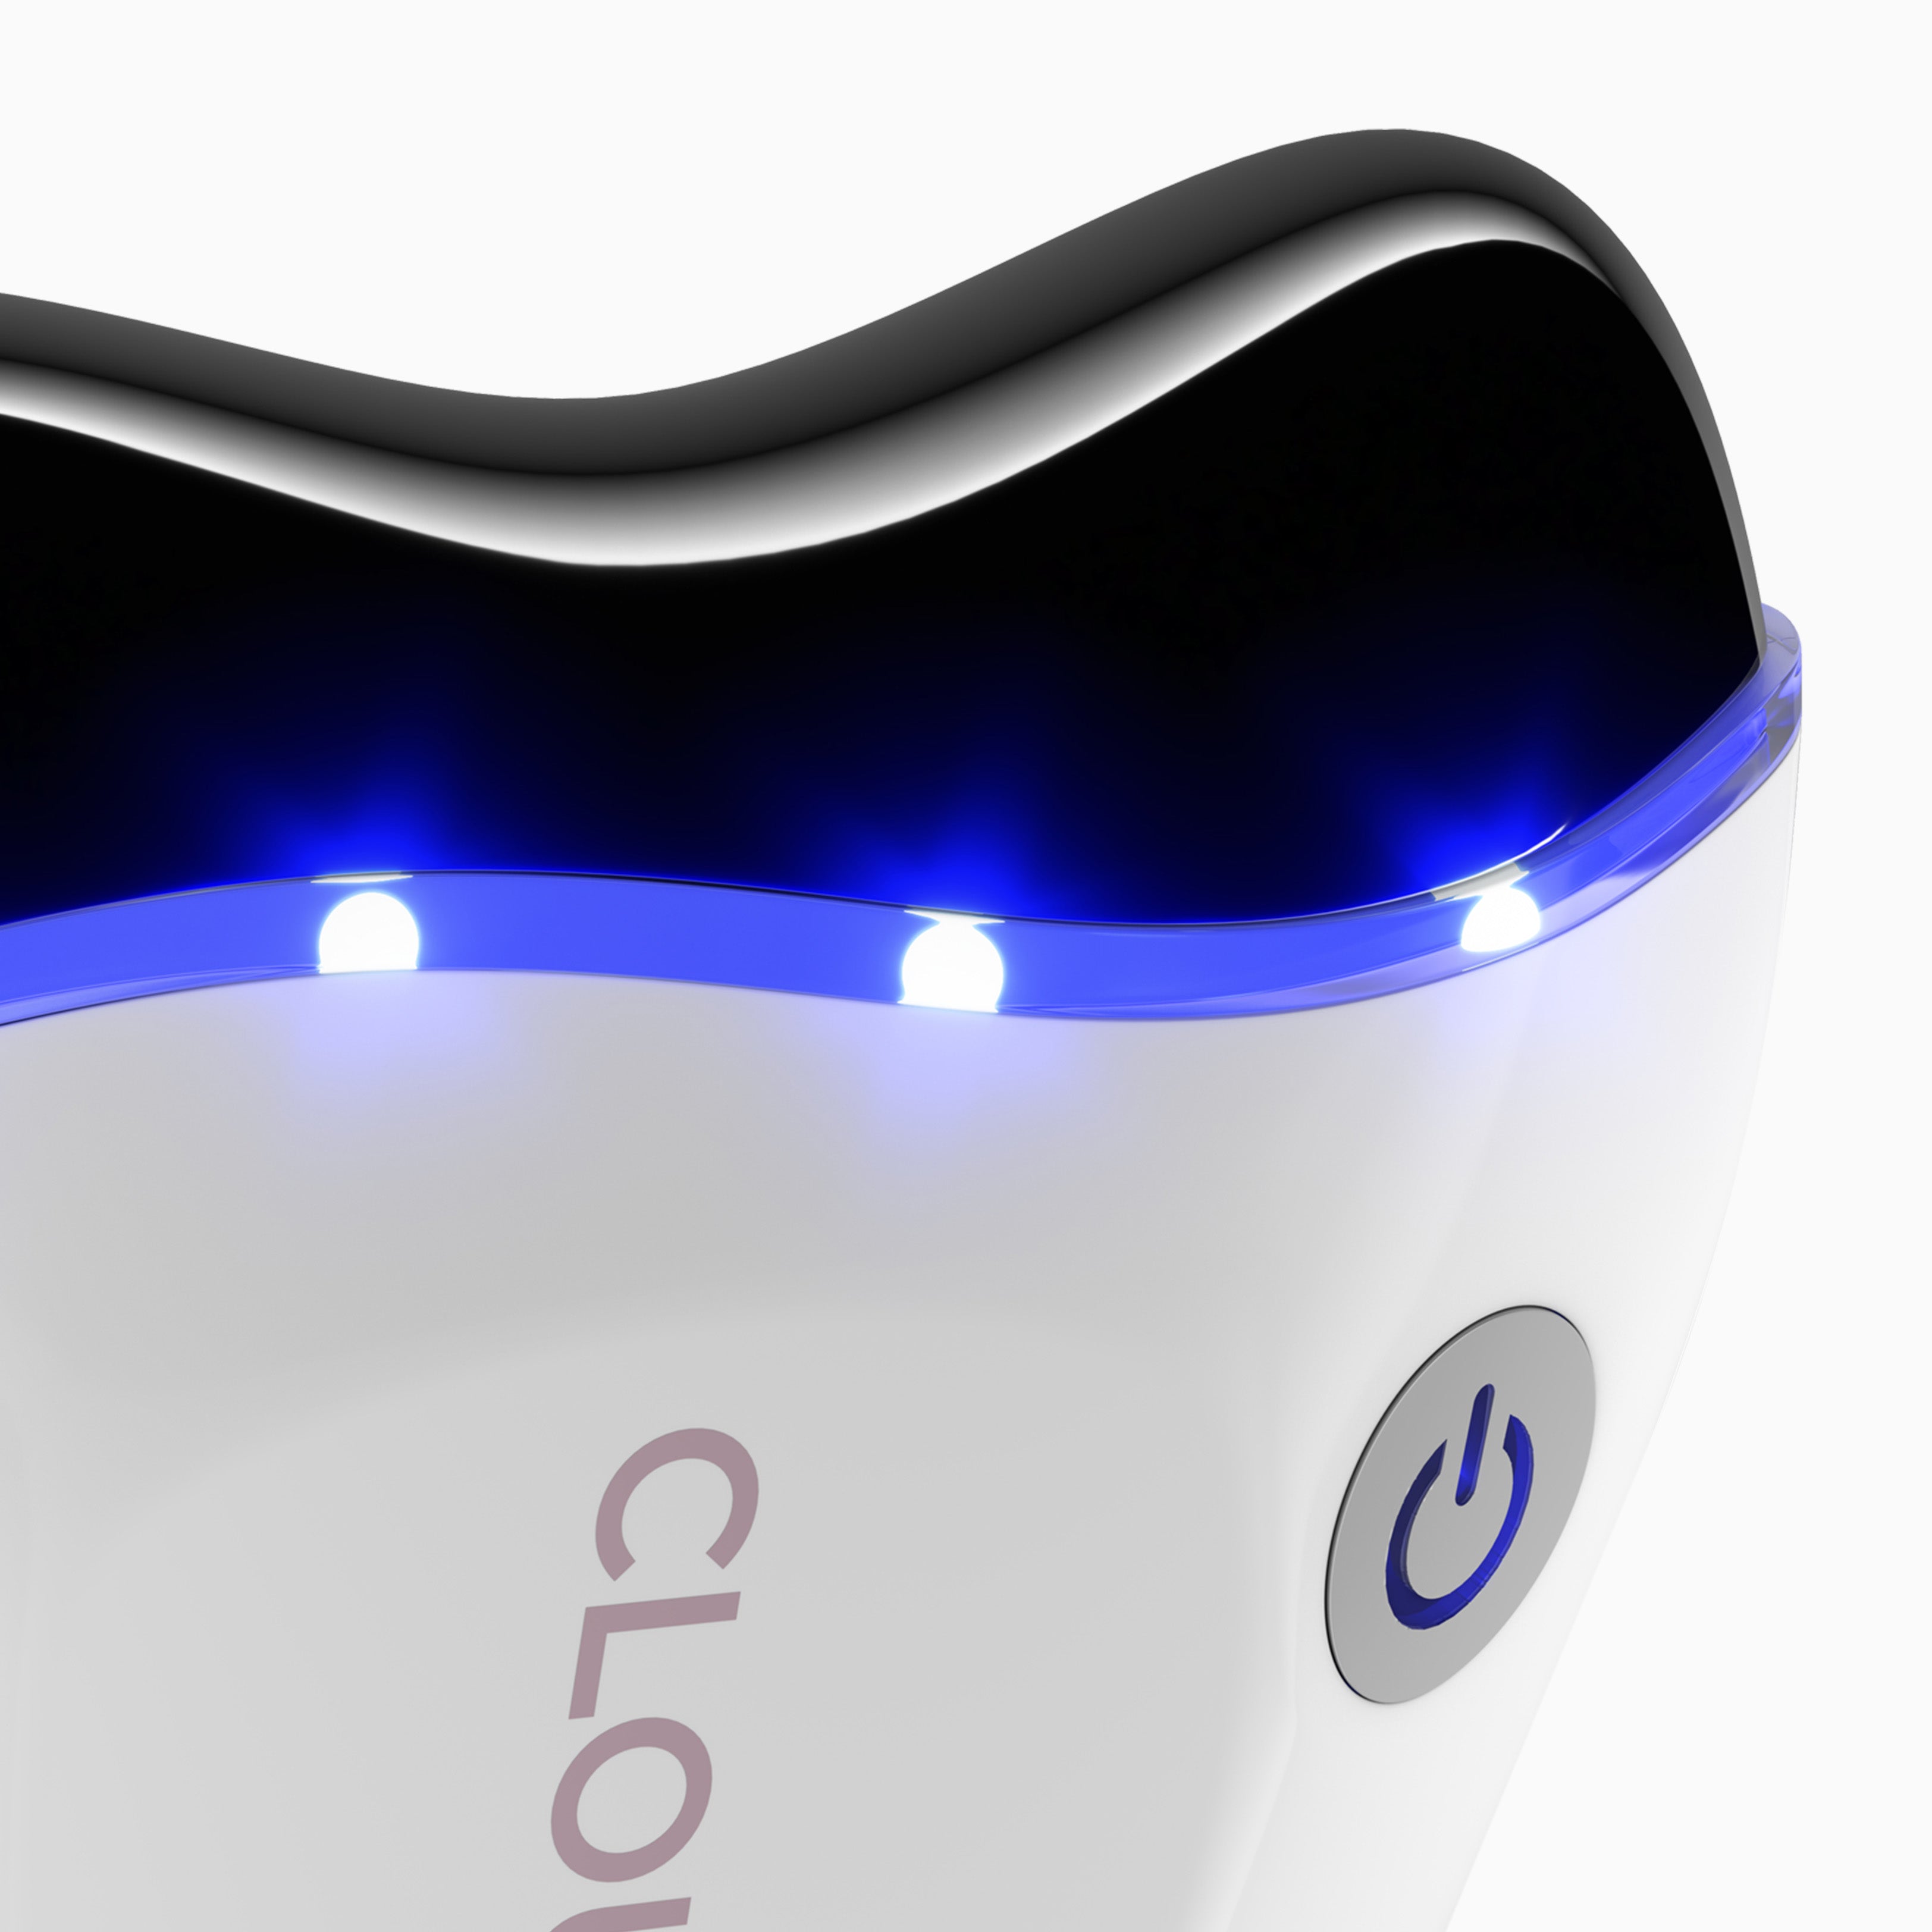 Close up of the CLOUD NINE Revive with Blue Light activated against a white background.